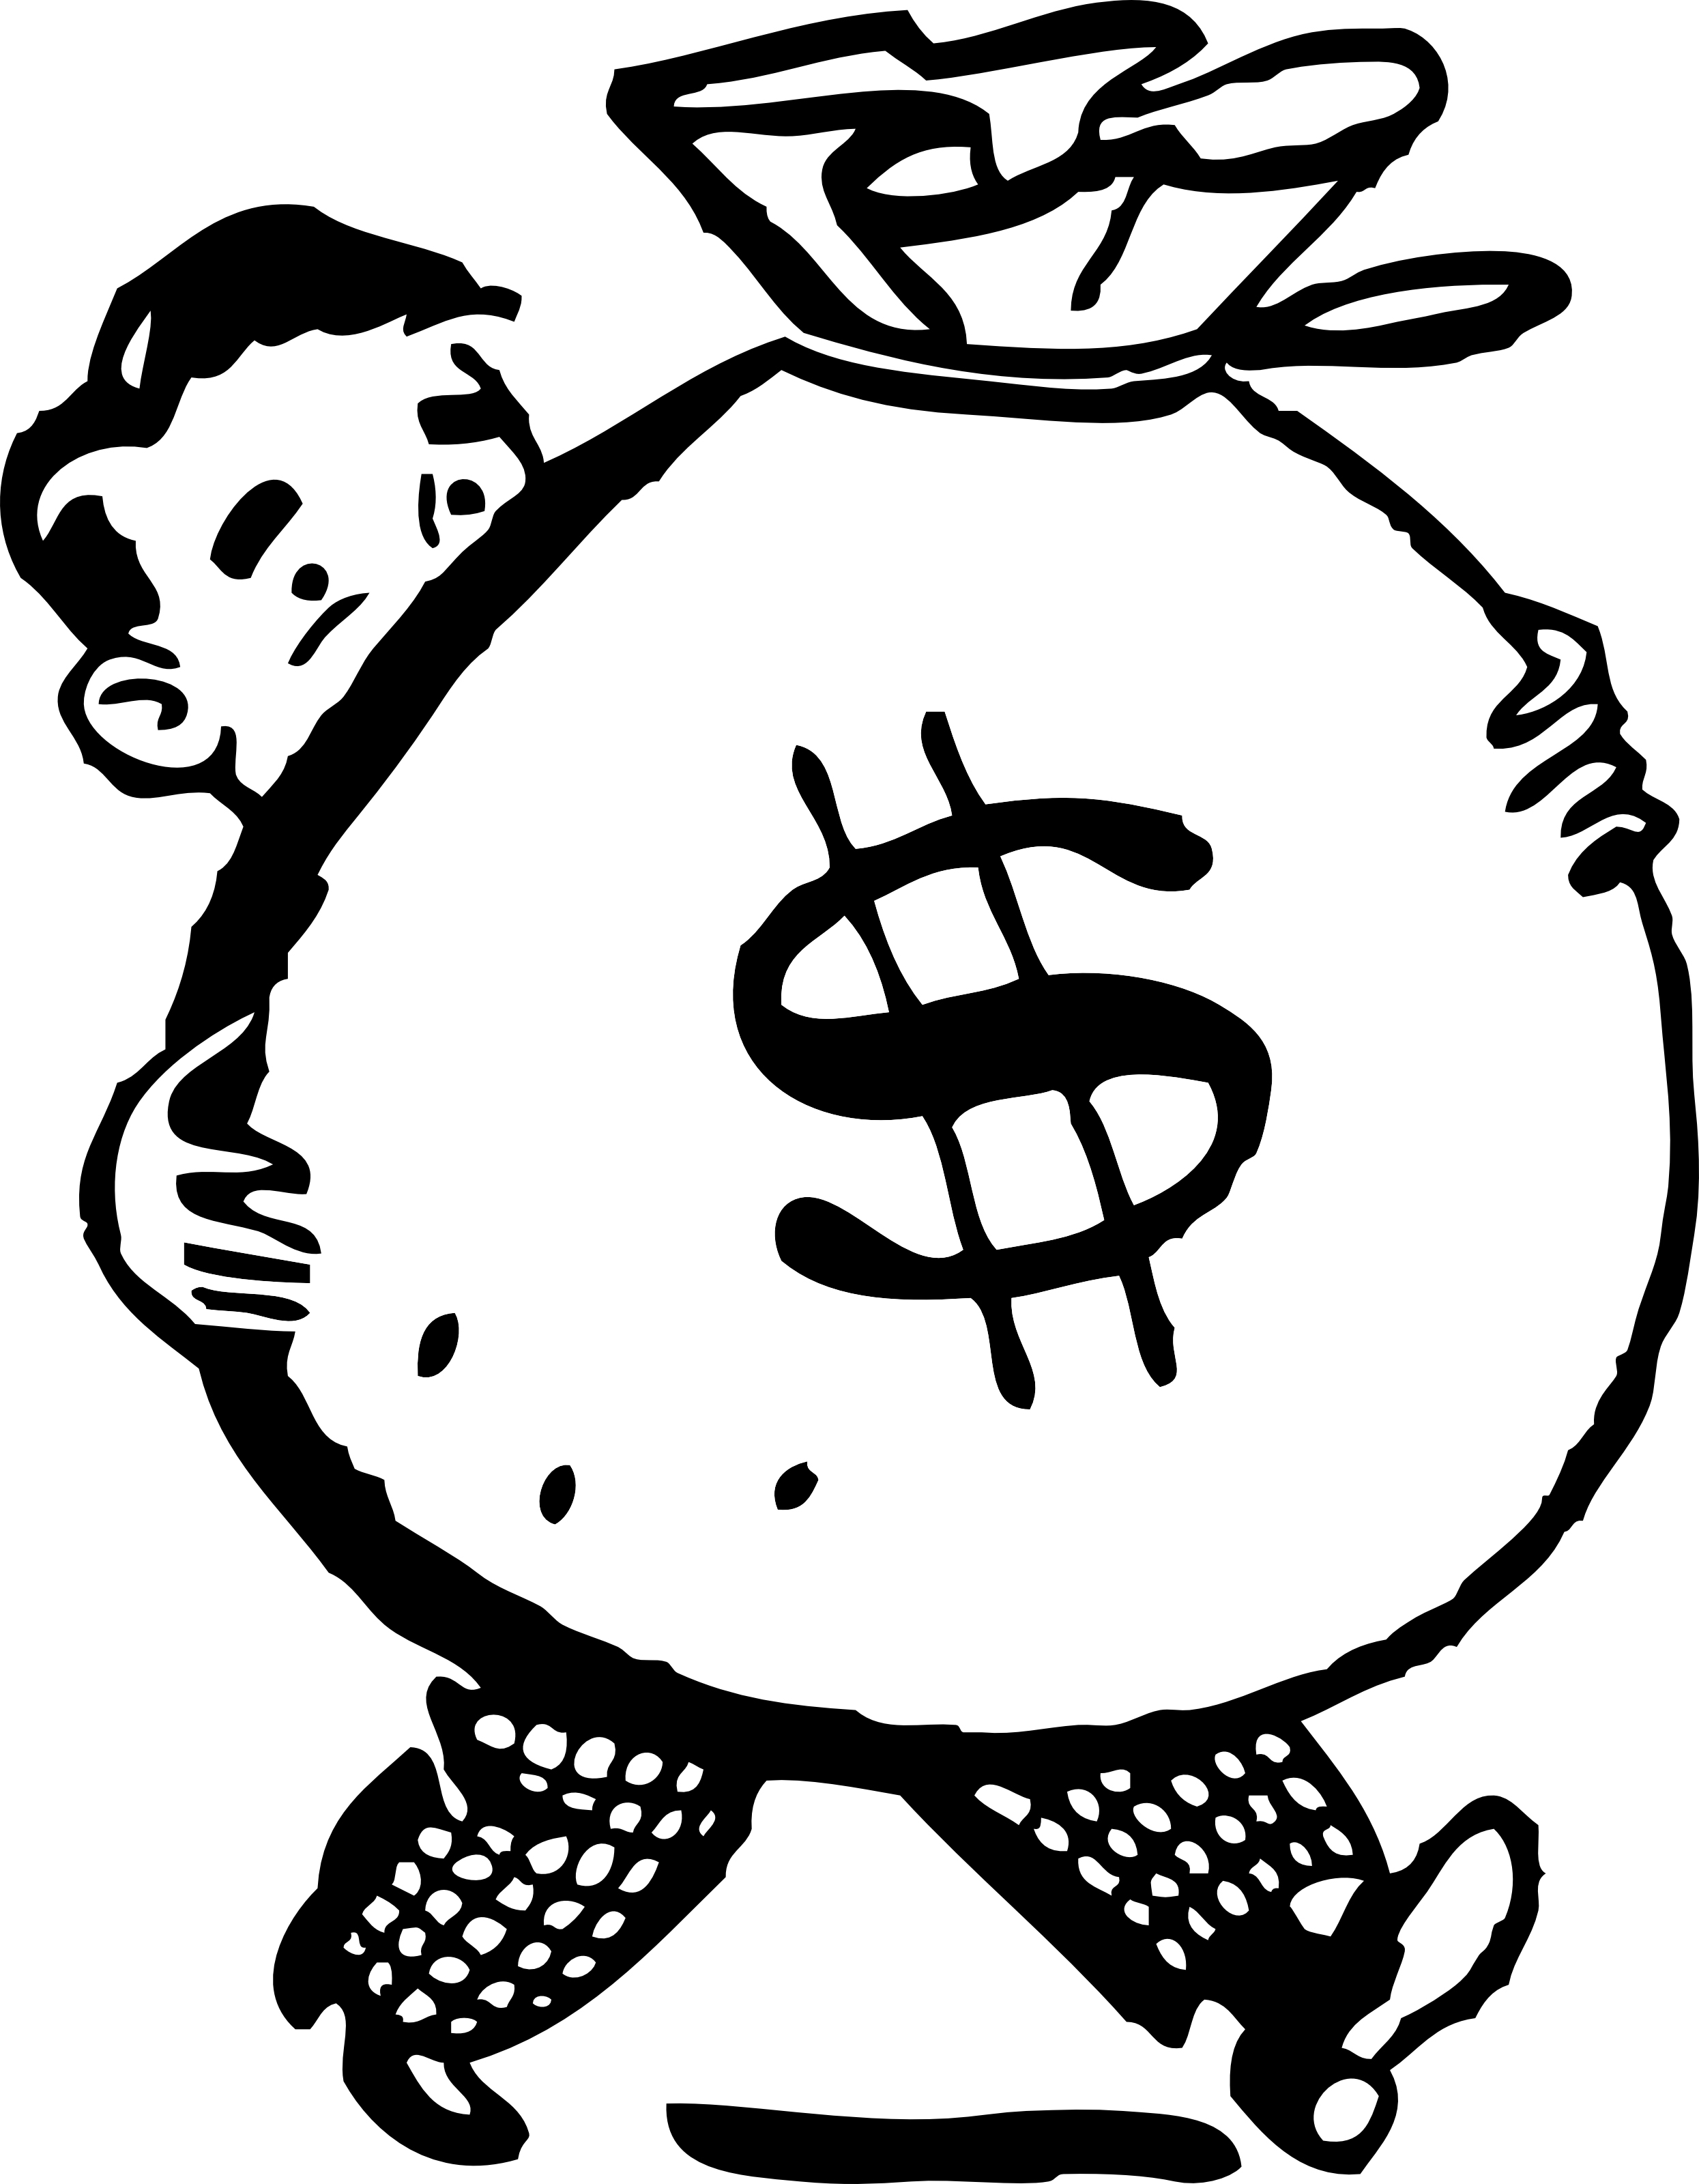 Images For > Dollar Bill Clipart Black And White